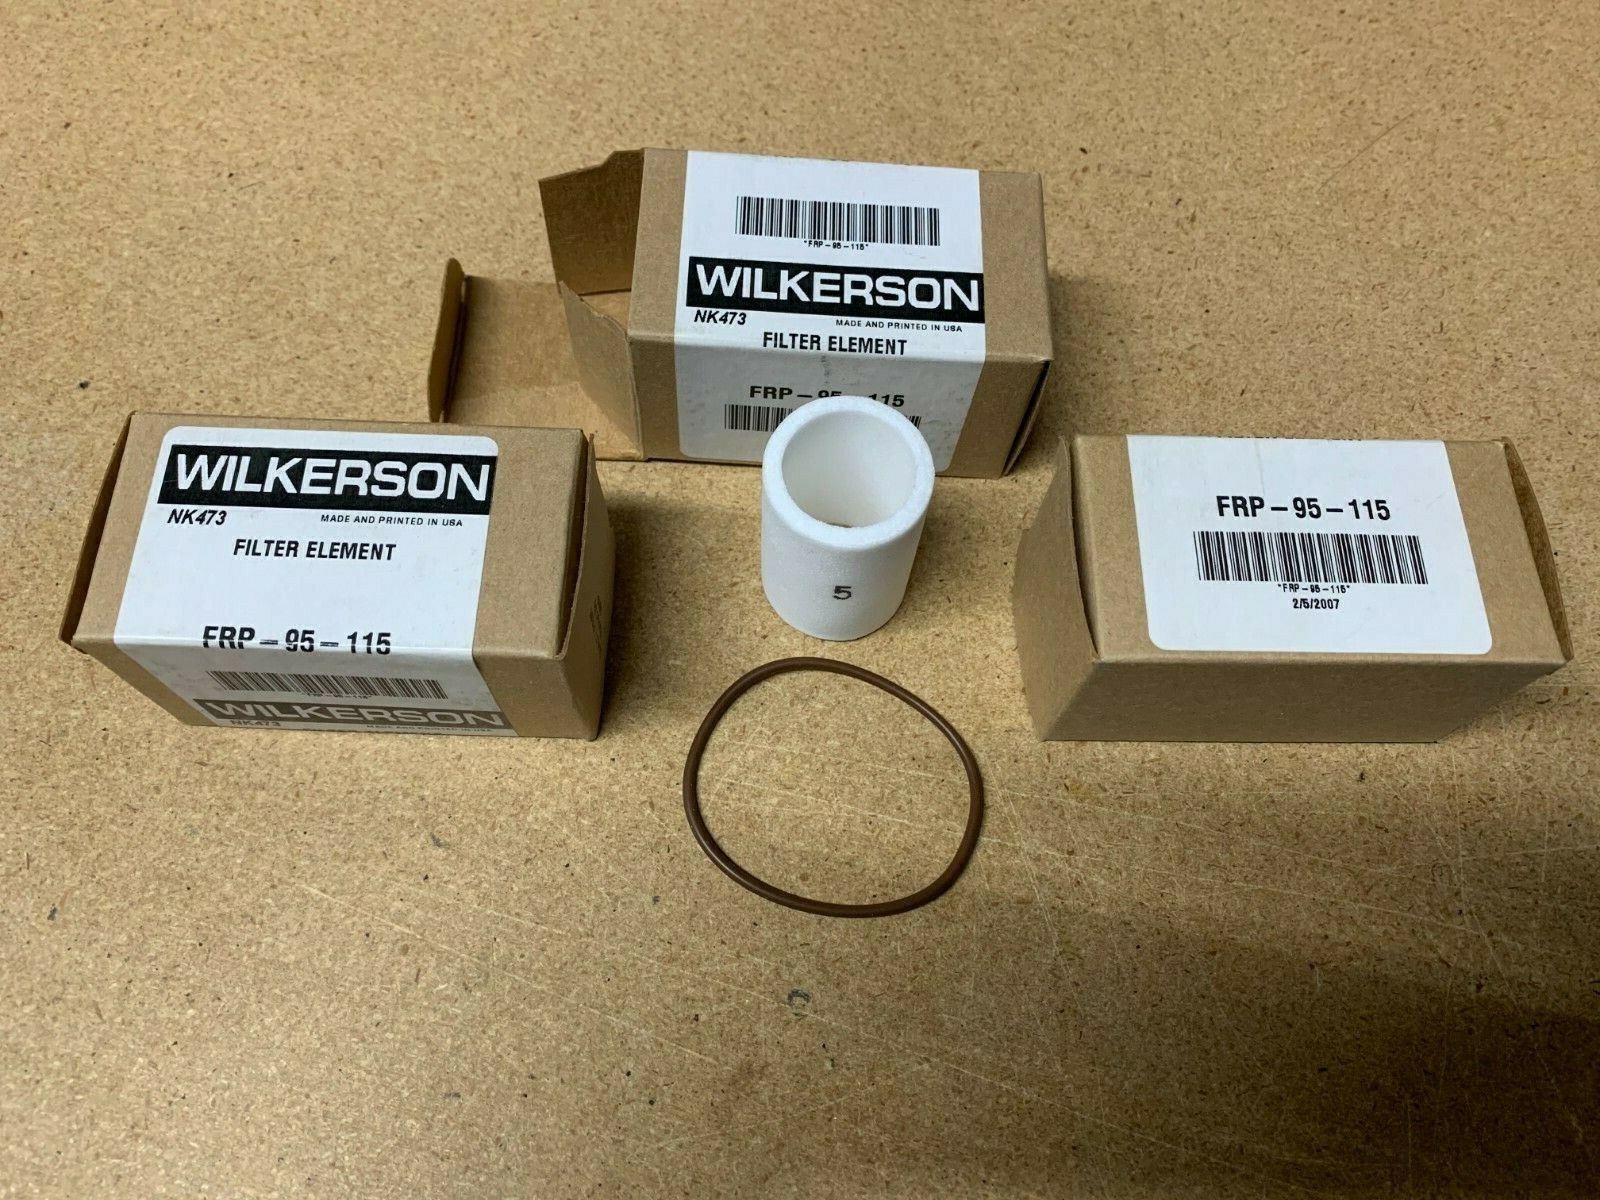 LOT OF 3 NEW WILKERSON FRP-95-115 FILTER ELEMENT